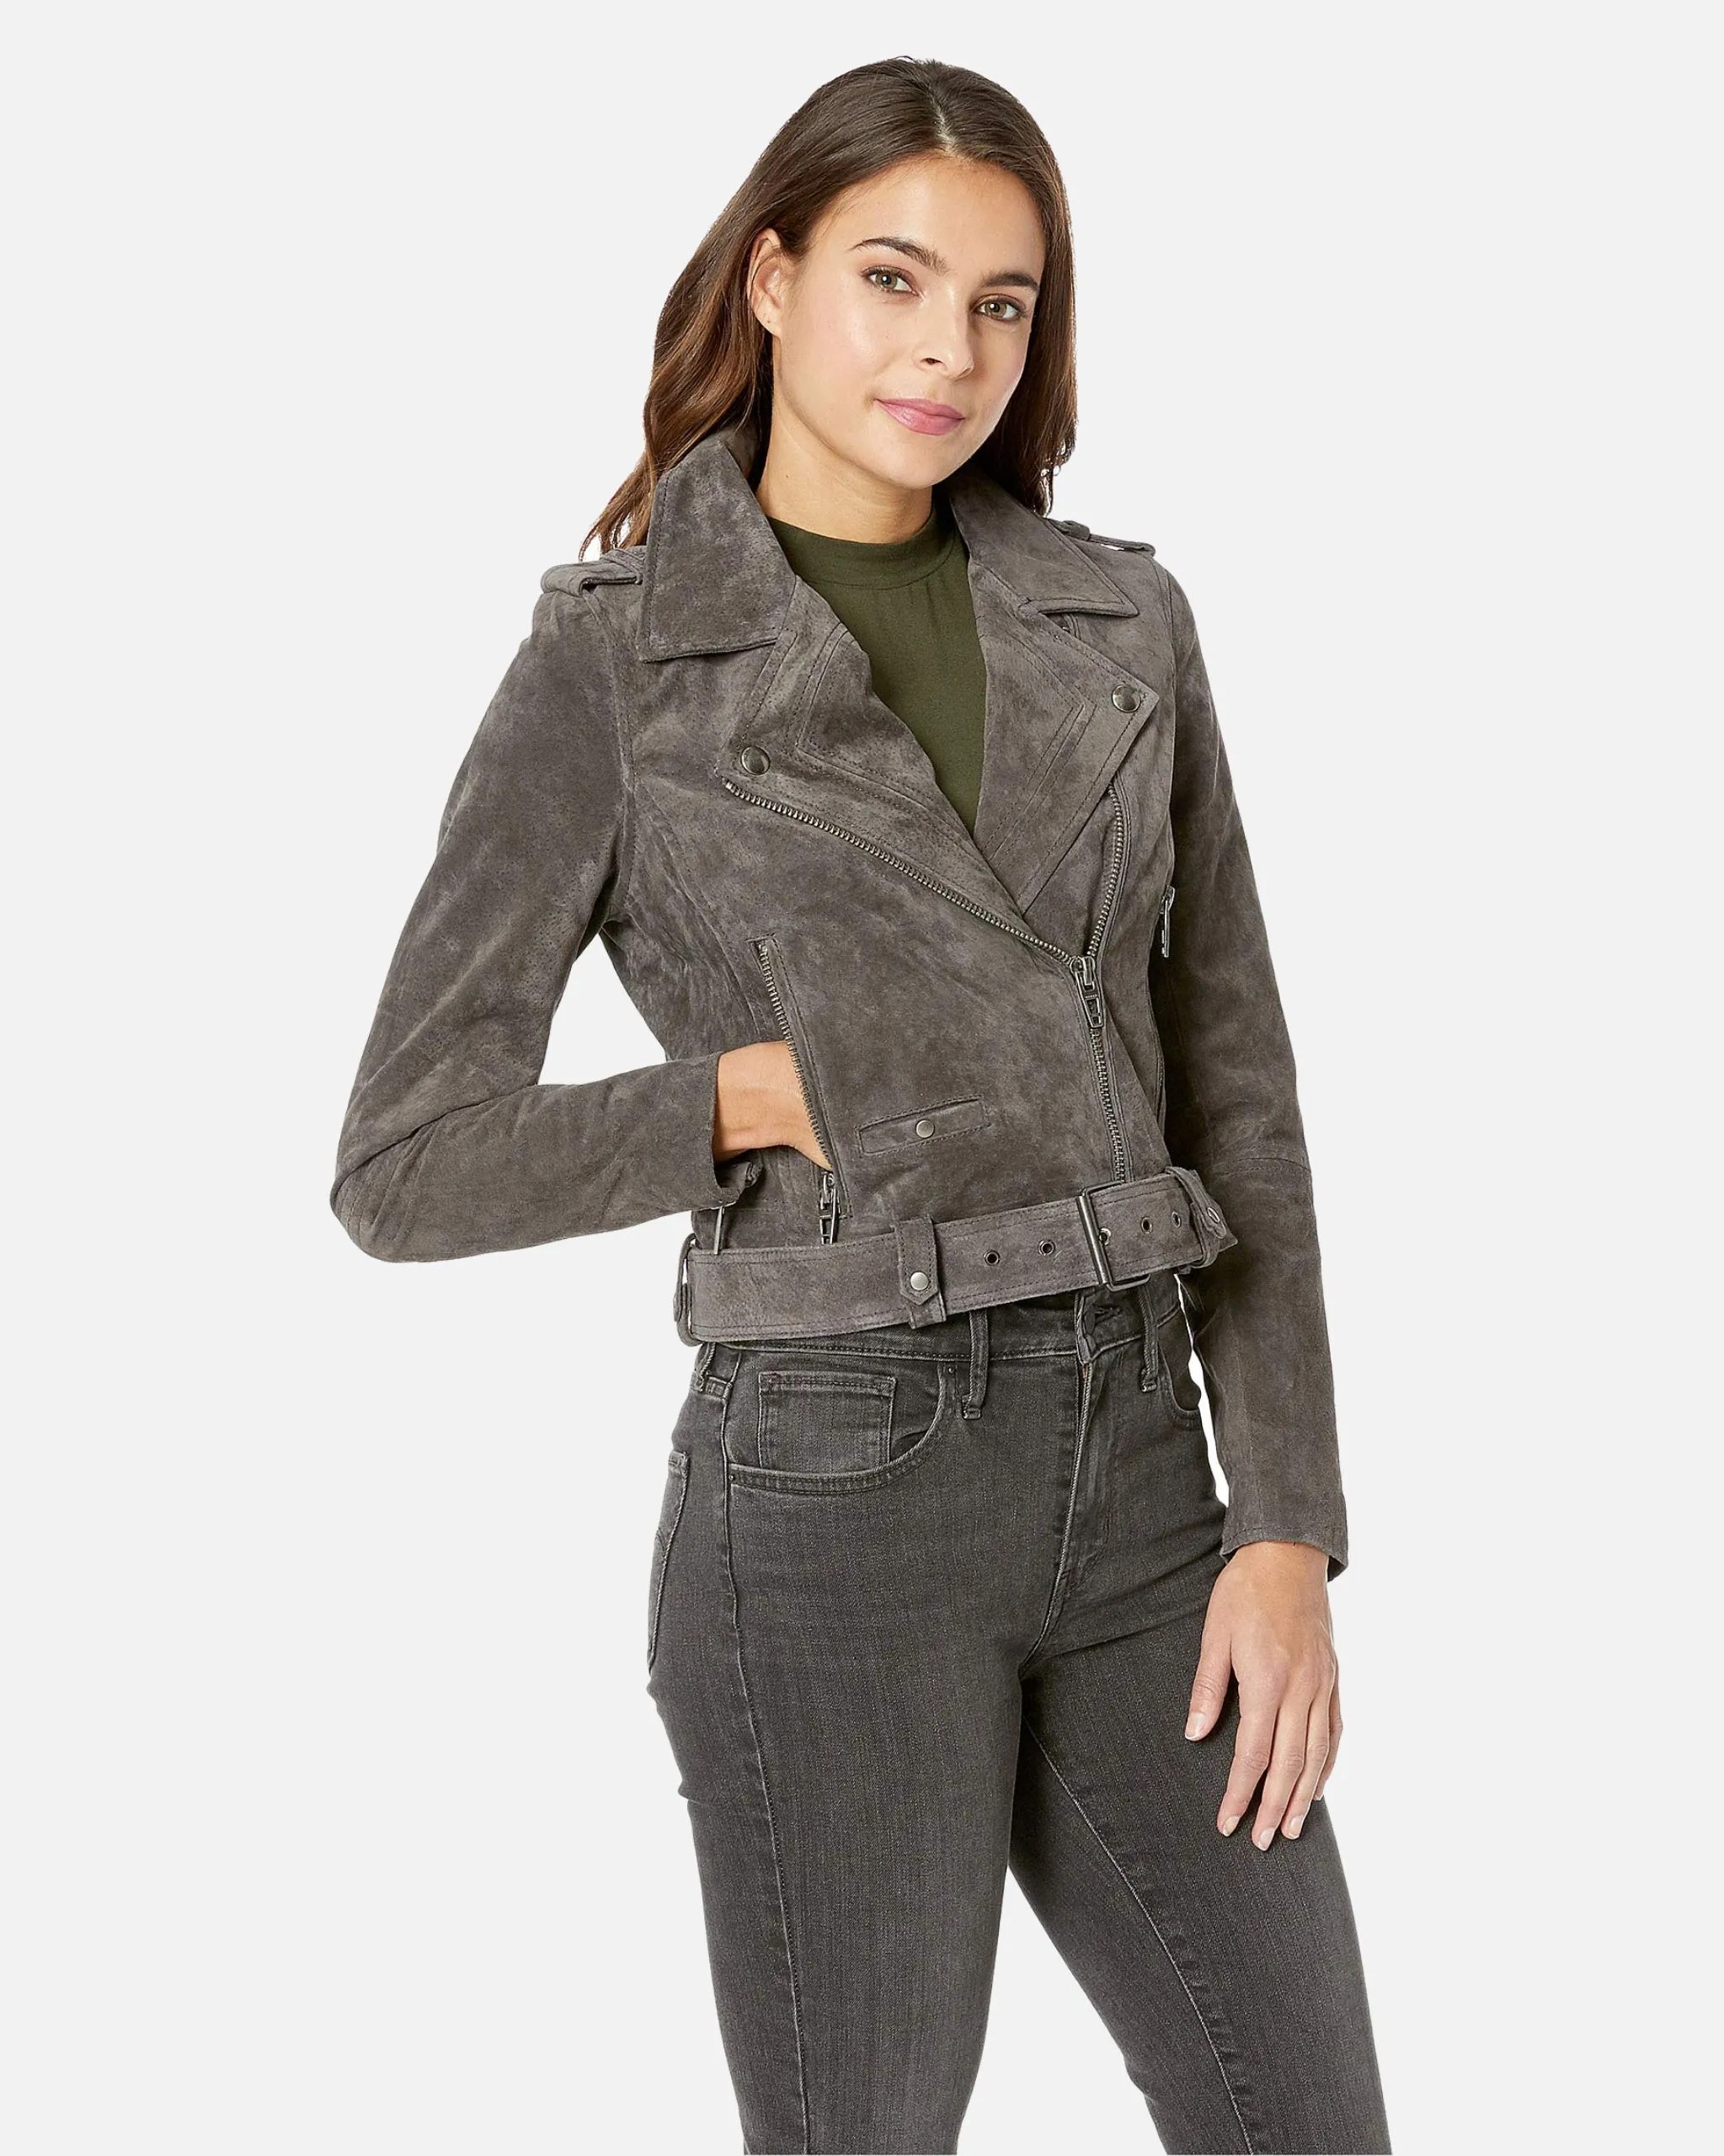 suede-french-grey-moto-leather-jacket-affordable-and-fashionable (5)